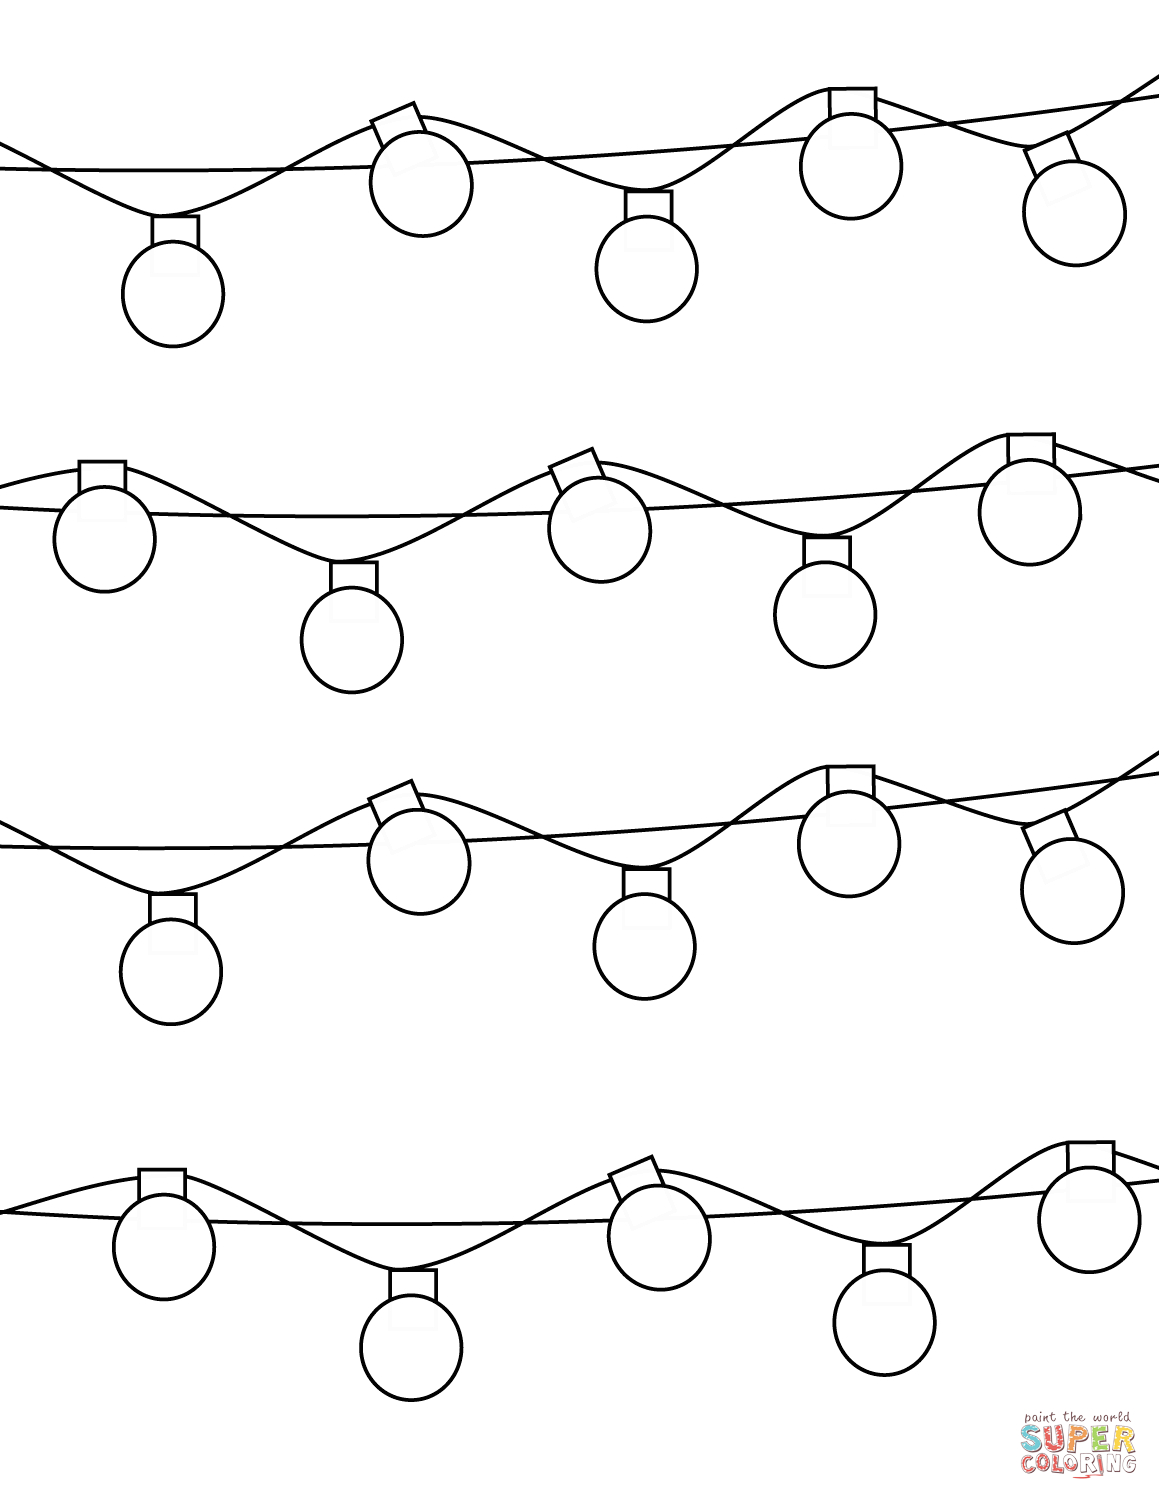 Christmas Lights | Super Coloring | Coloring Pages | Super Coloring - Free Printable Christmas Lights Coloring Pages